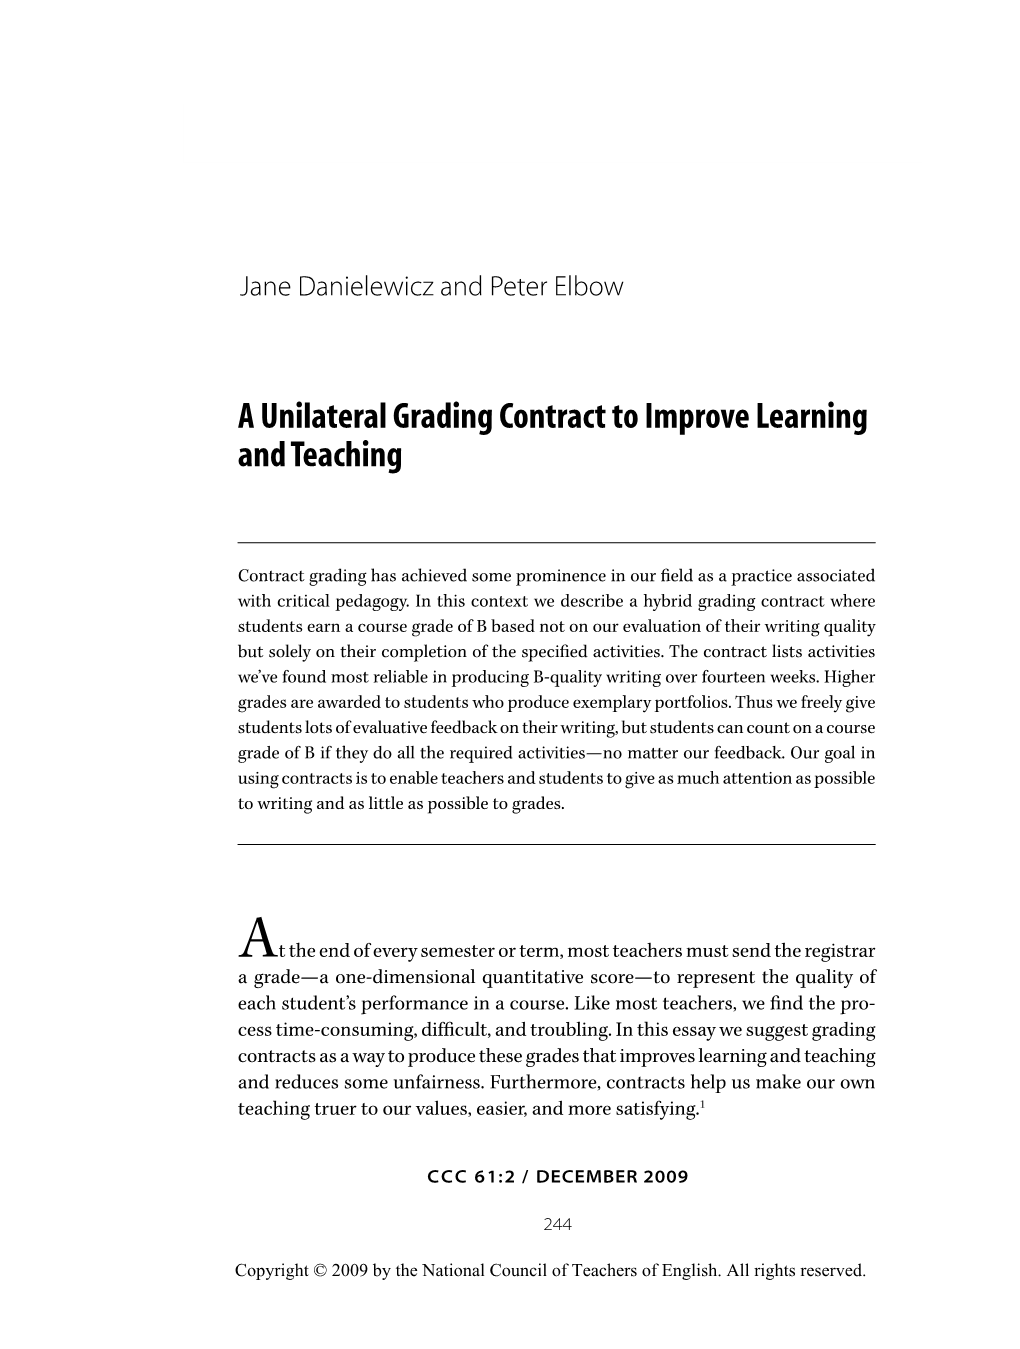 A Unilateral Grading Contract to Improve Learning and Teaching